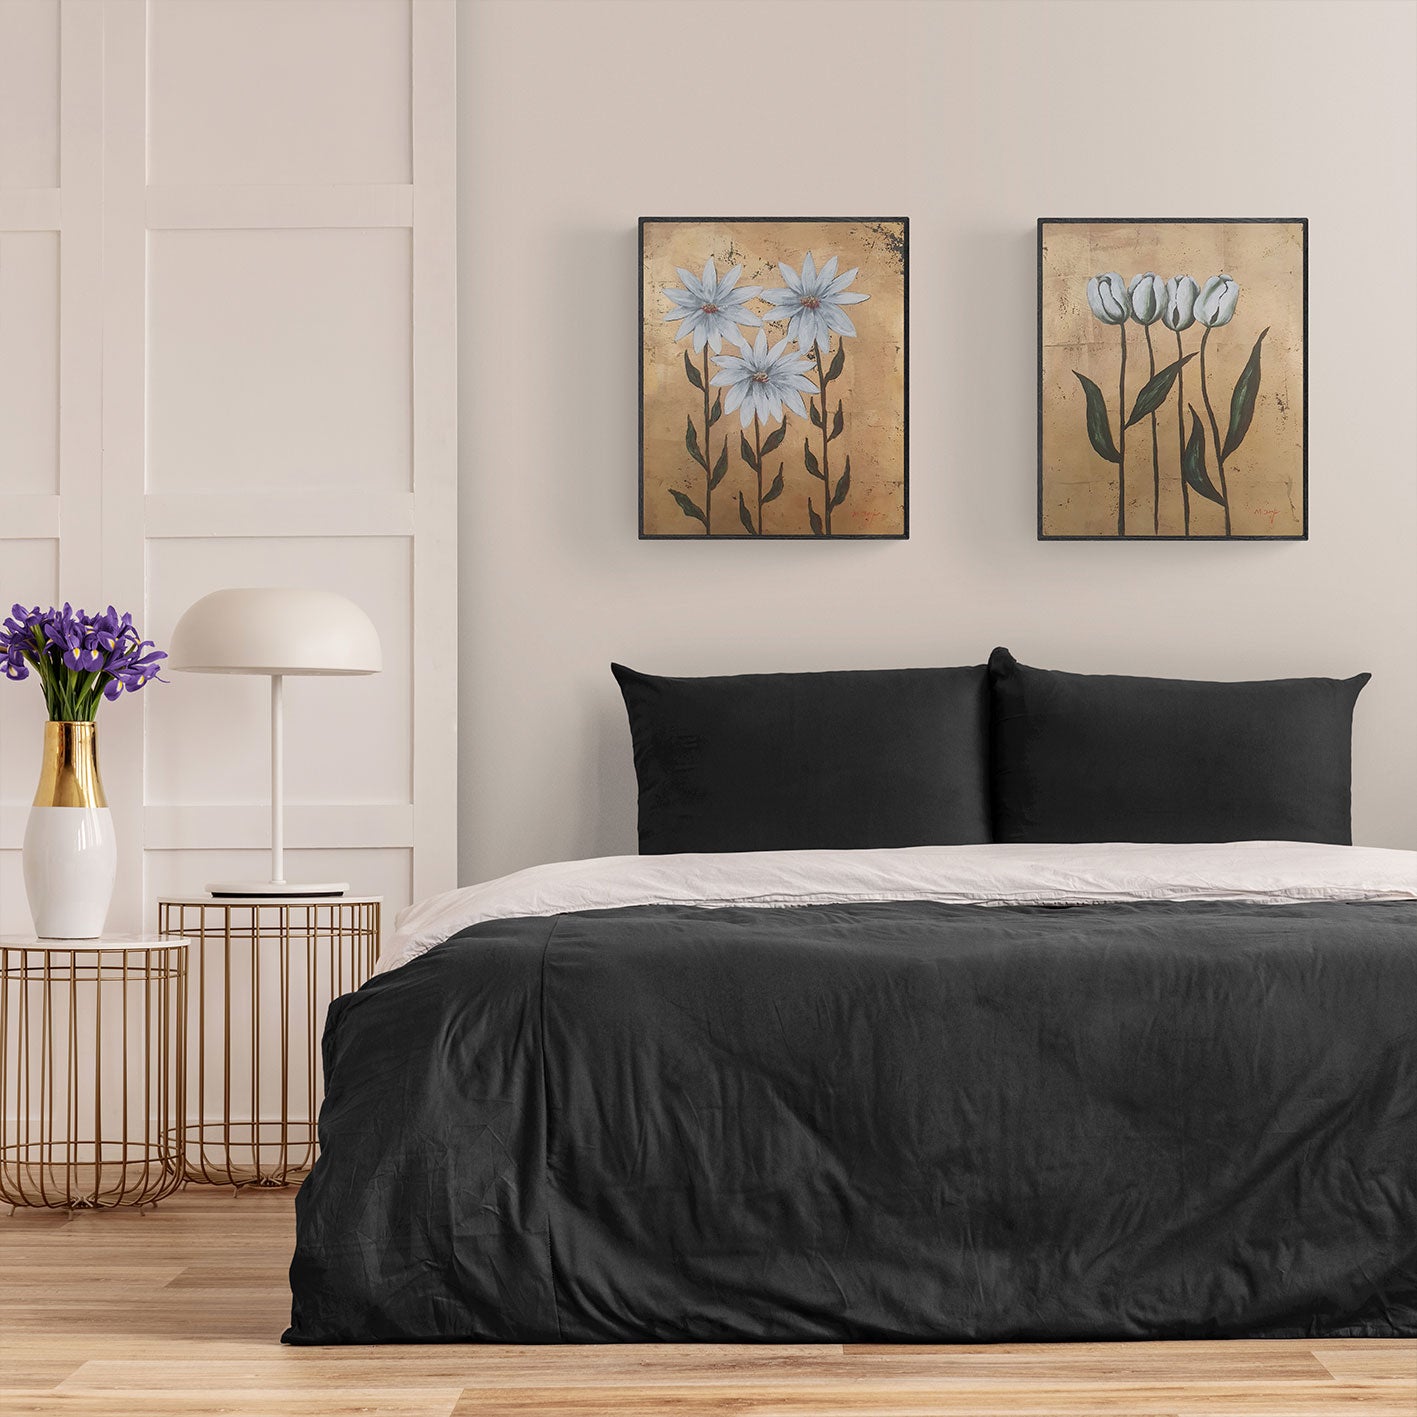 Gold Flowers Diptych Painting 50x60 cm [2 pieces]